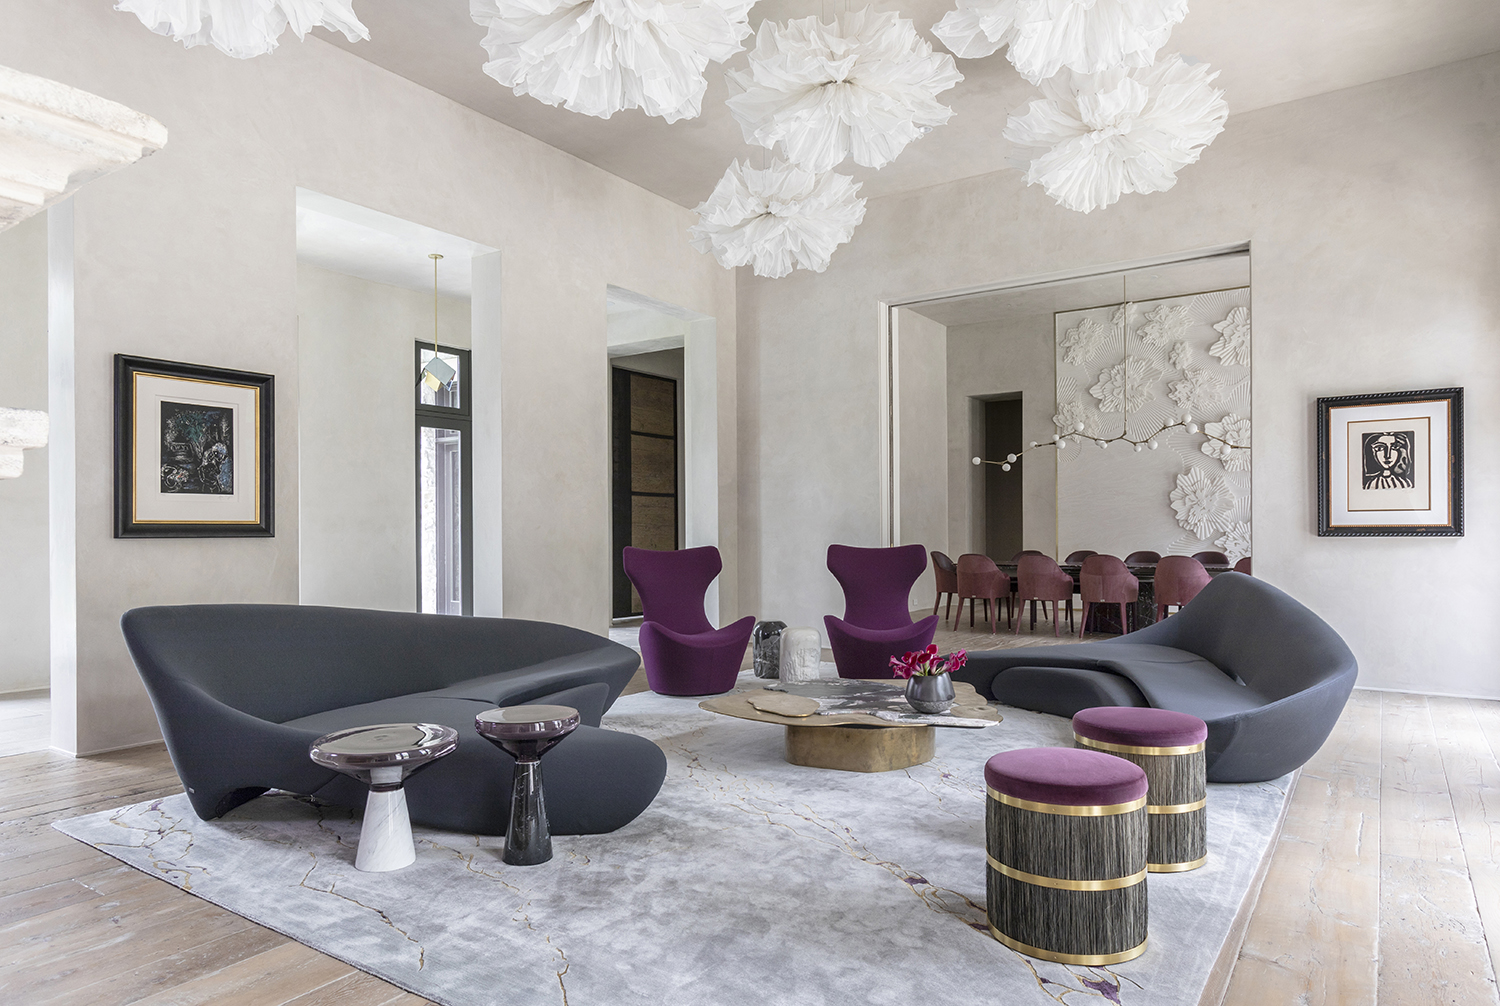 Luxe home decor ideas from a high end Houston house